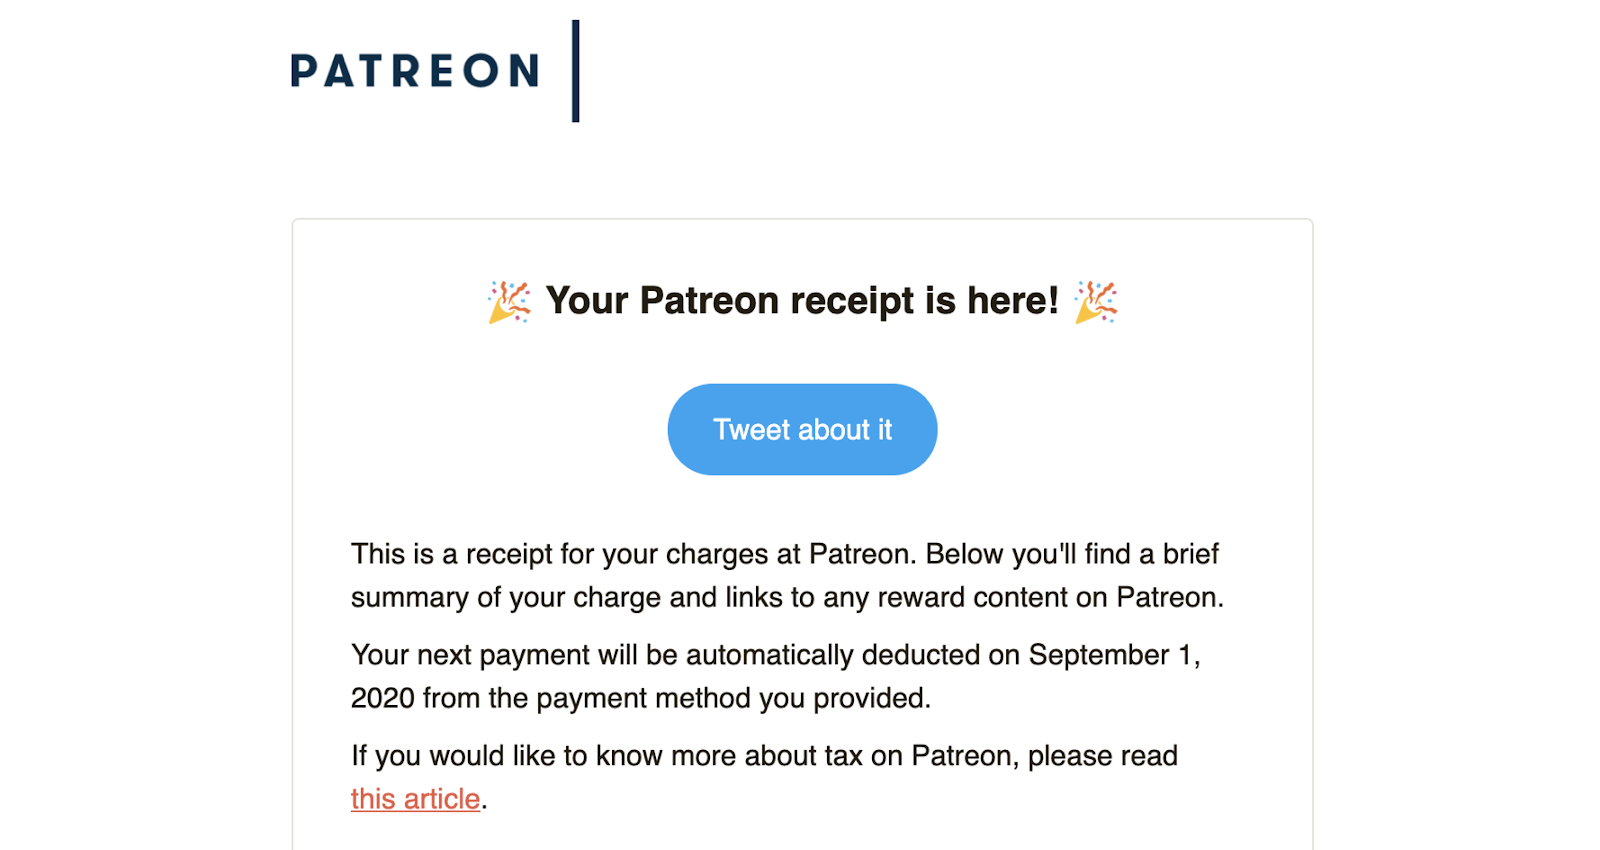 Patreon email your receipt is here